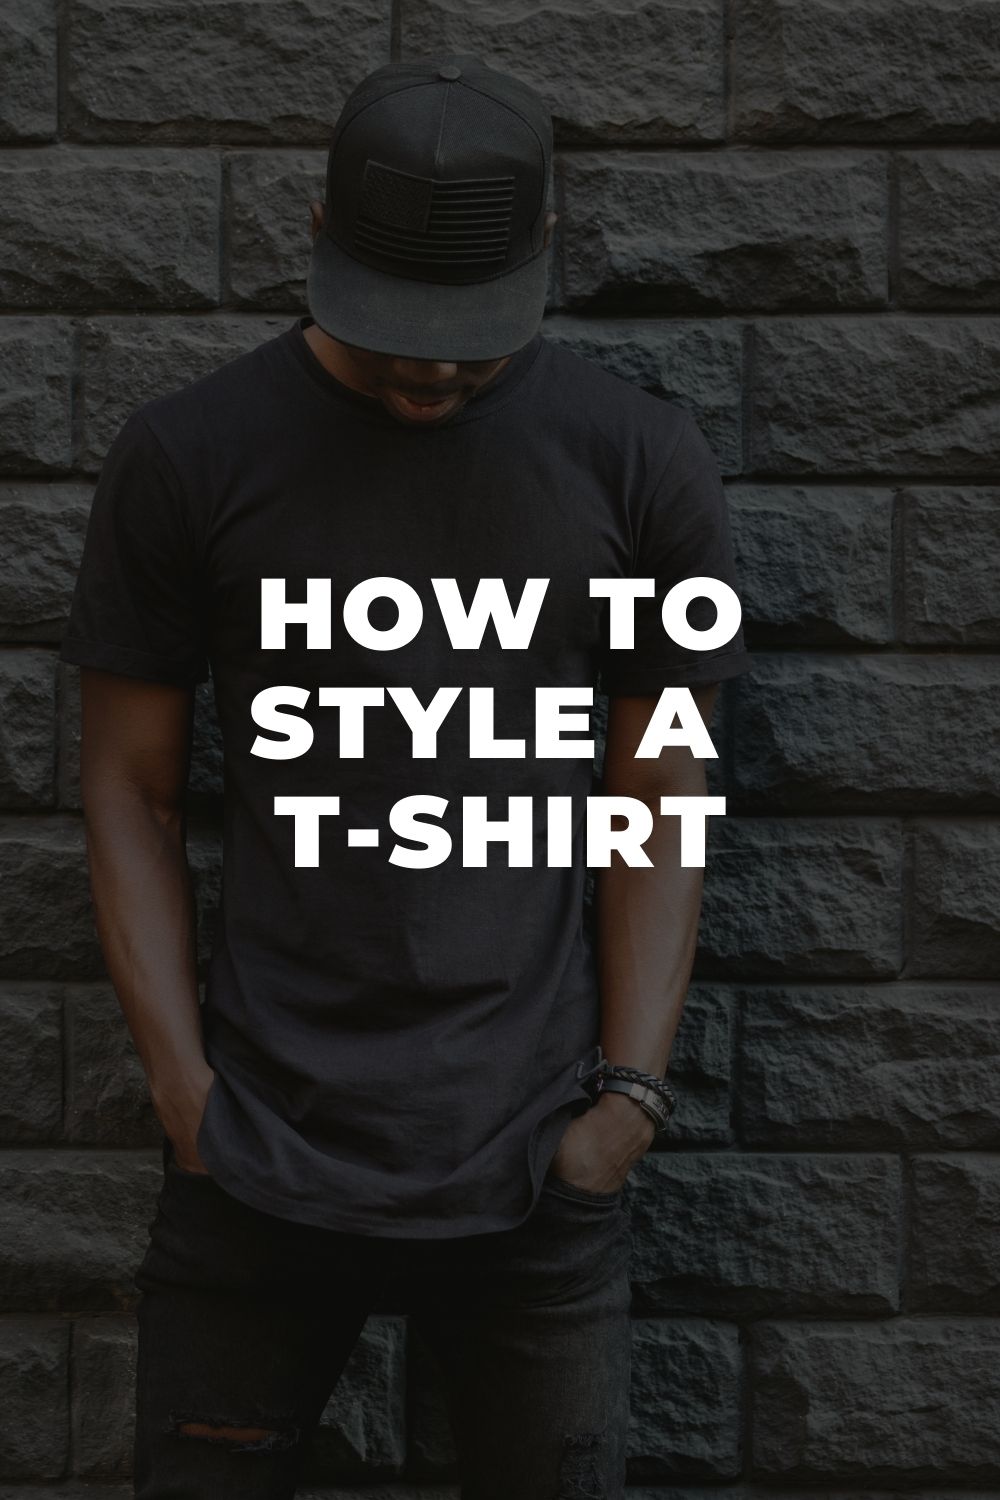 How to Style a T-Shirt